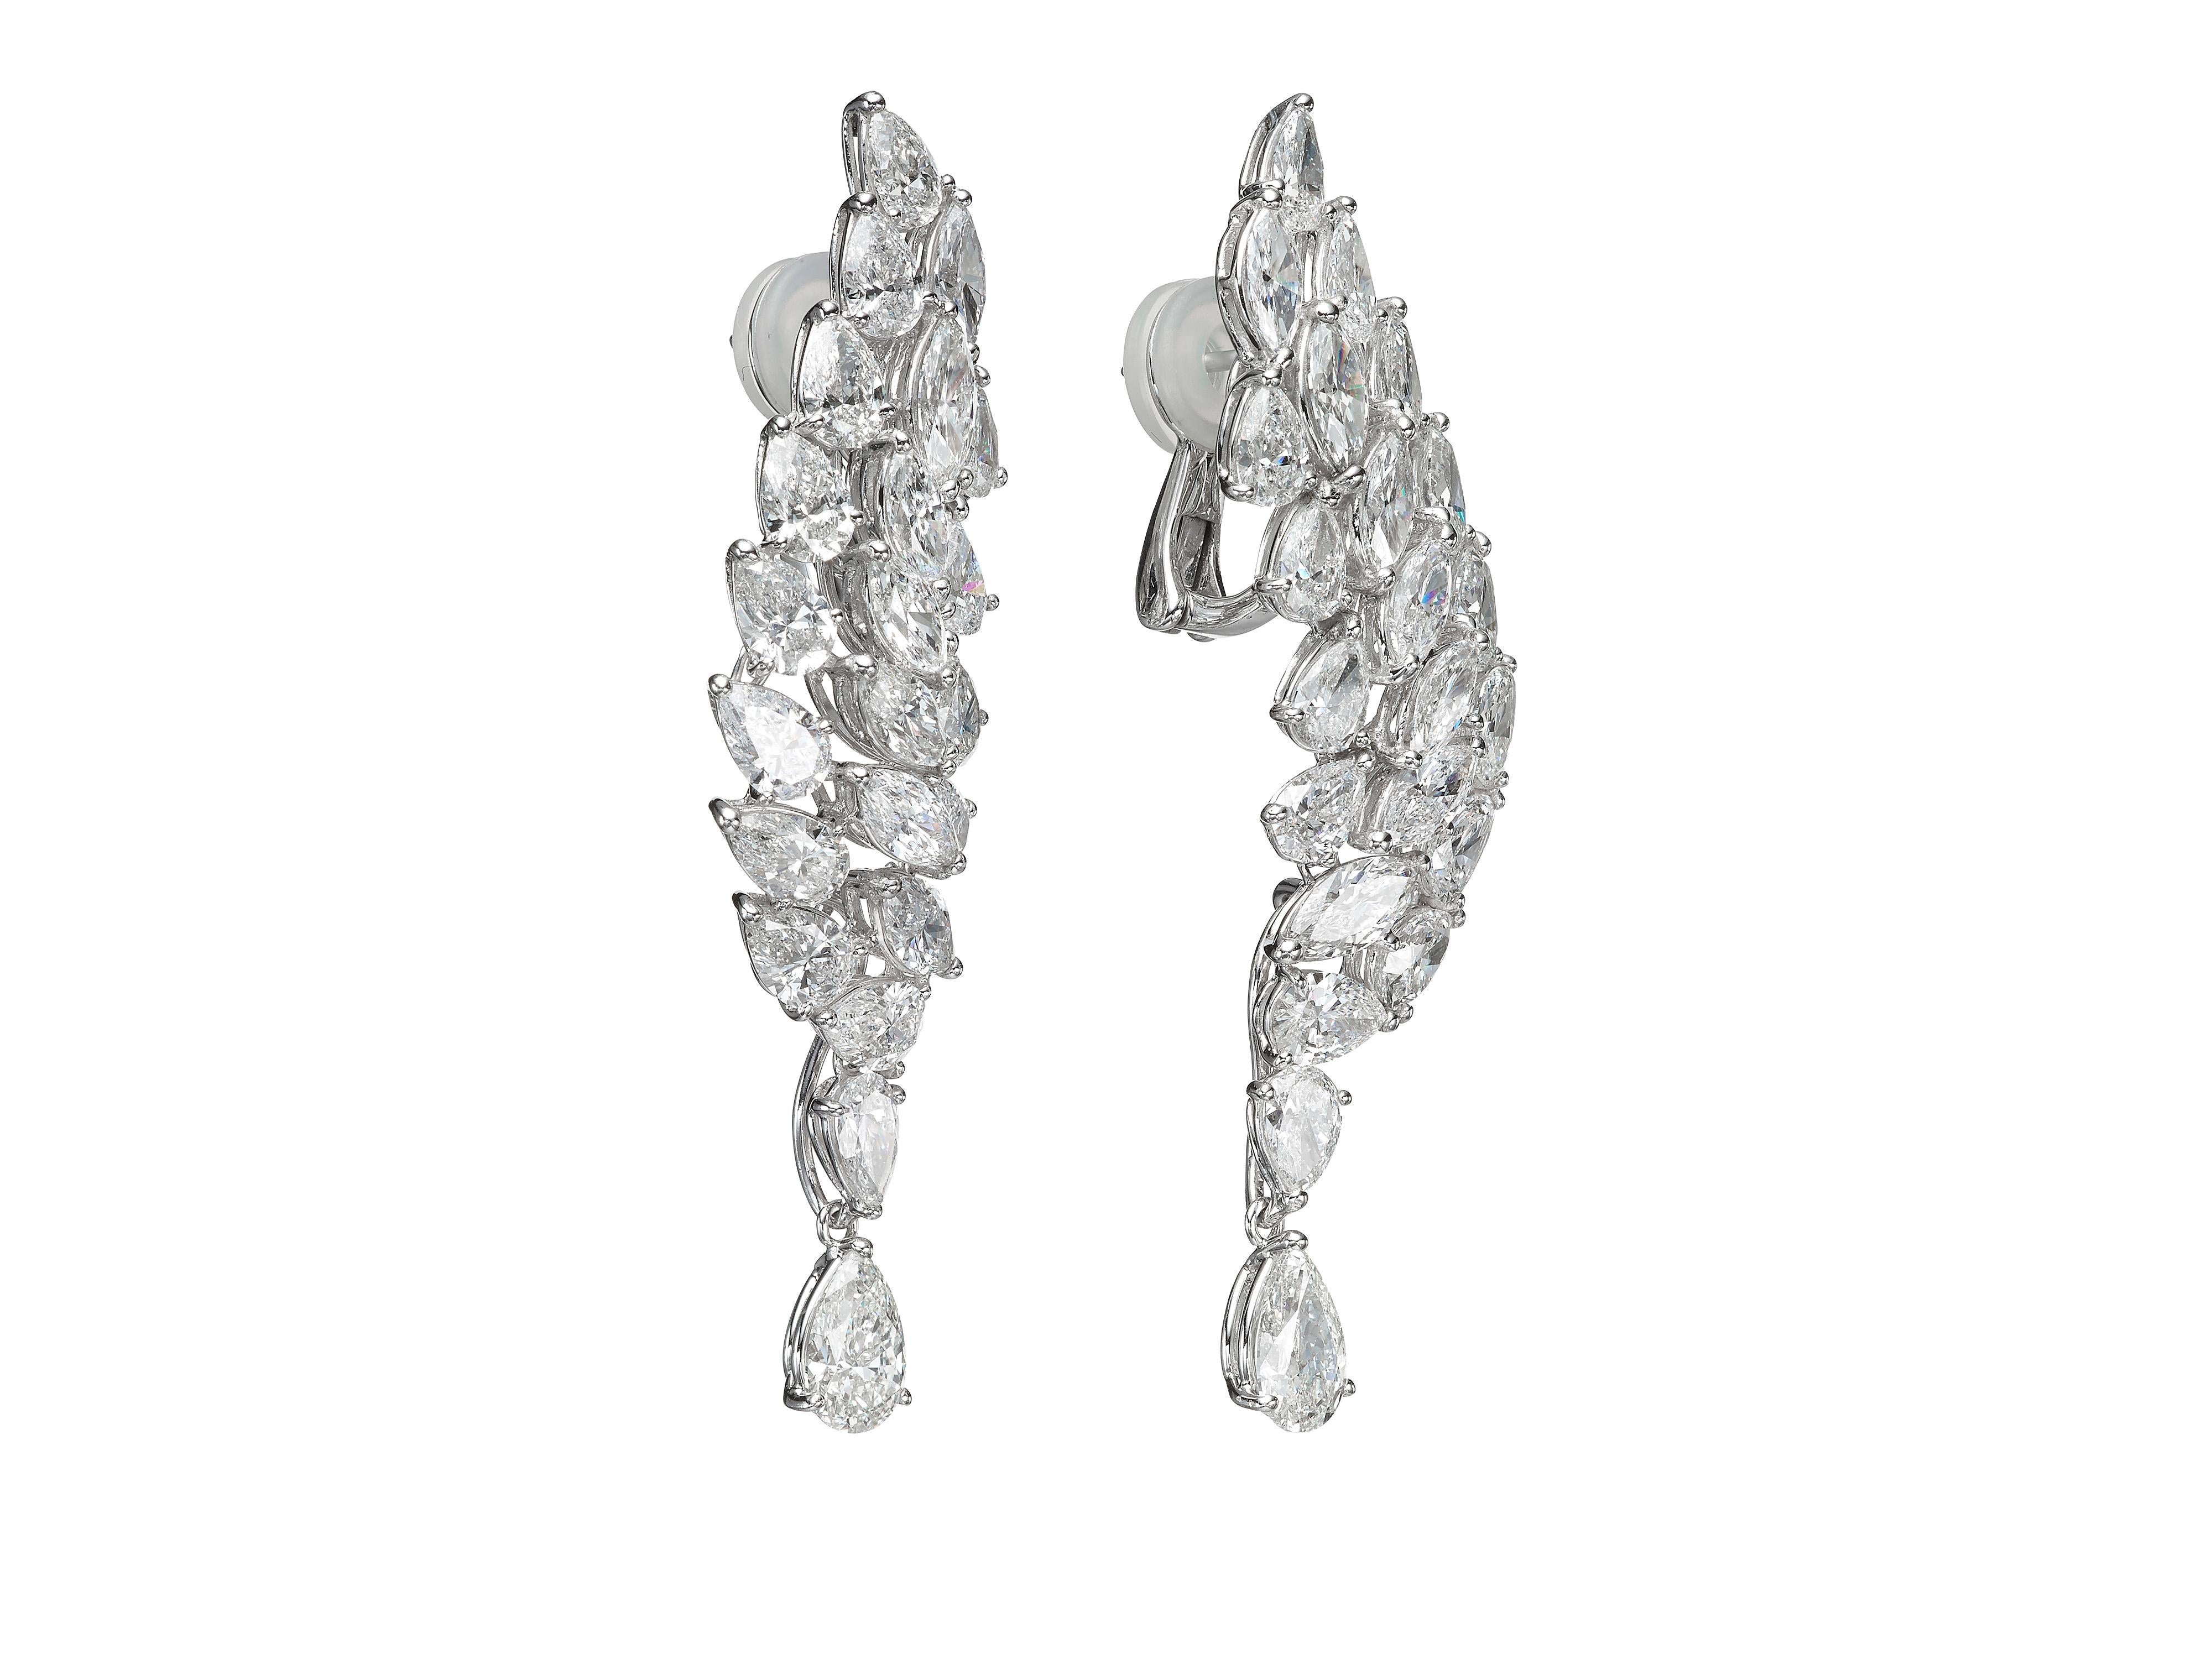 Masterfully handcrafted by Butani and encrusted with glittering marquise and pear-shaped diamonds.  These chandelier earrings feature GIA certified 0.90 and 0.91 carat pear-shaped diamond drops suspended delicately at the end.  Total diamond weight